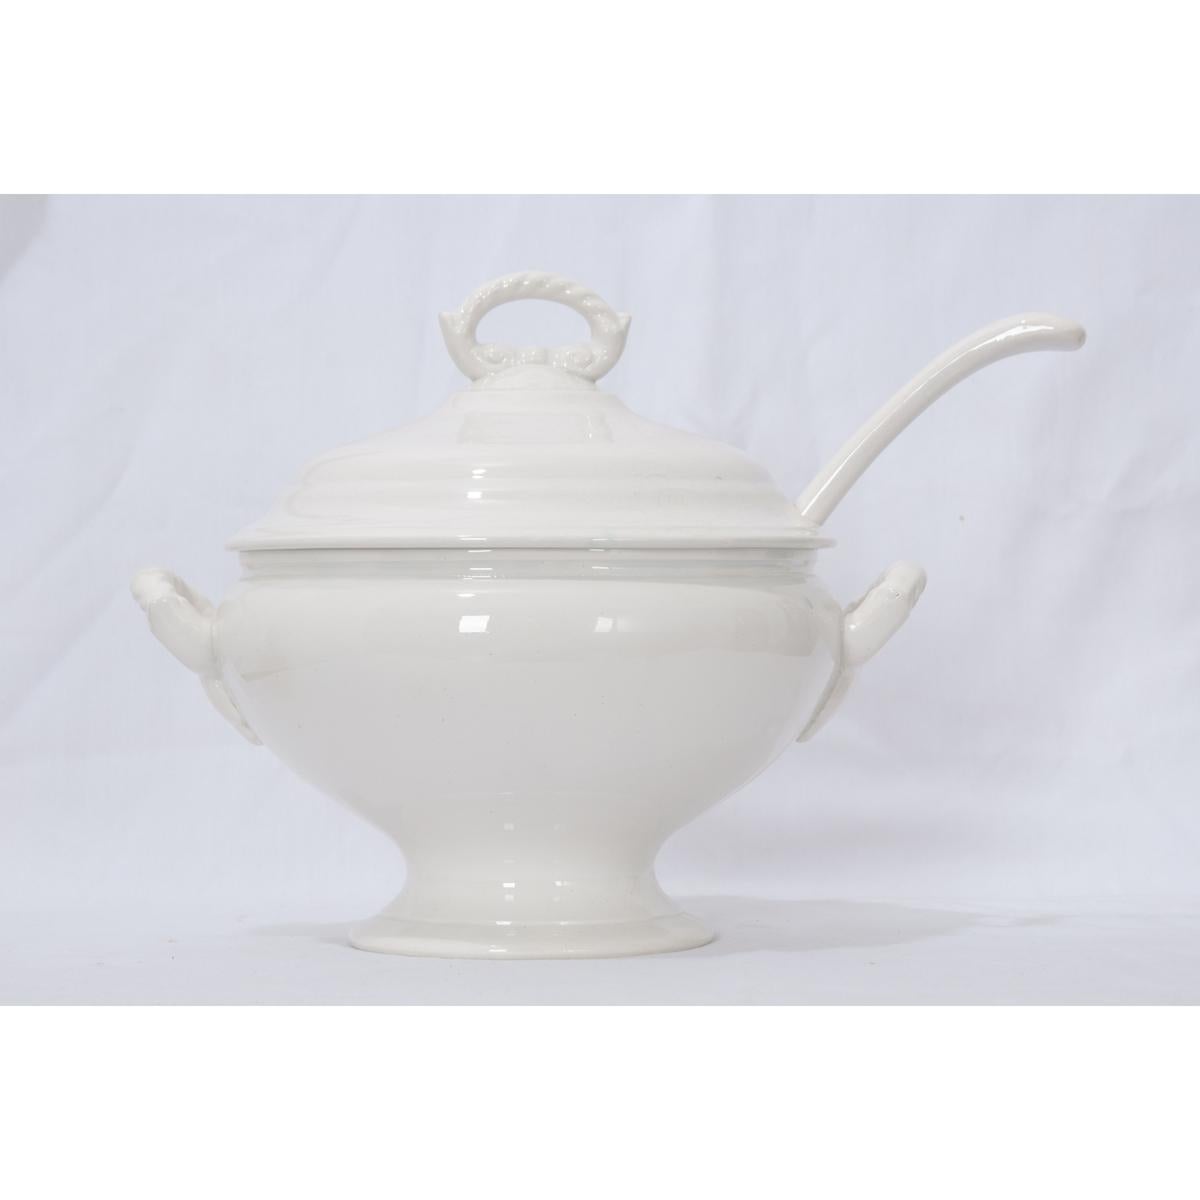 A gorgeous early French 20th century, circa 1900, white ironstone tureen with fitted lid and ladle. The stylish lid features a detailed pull handle. This white interior finish is clean, perfect for serving soups, stews, or gumbos. Two handles are